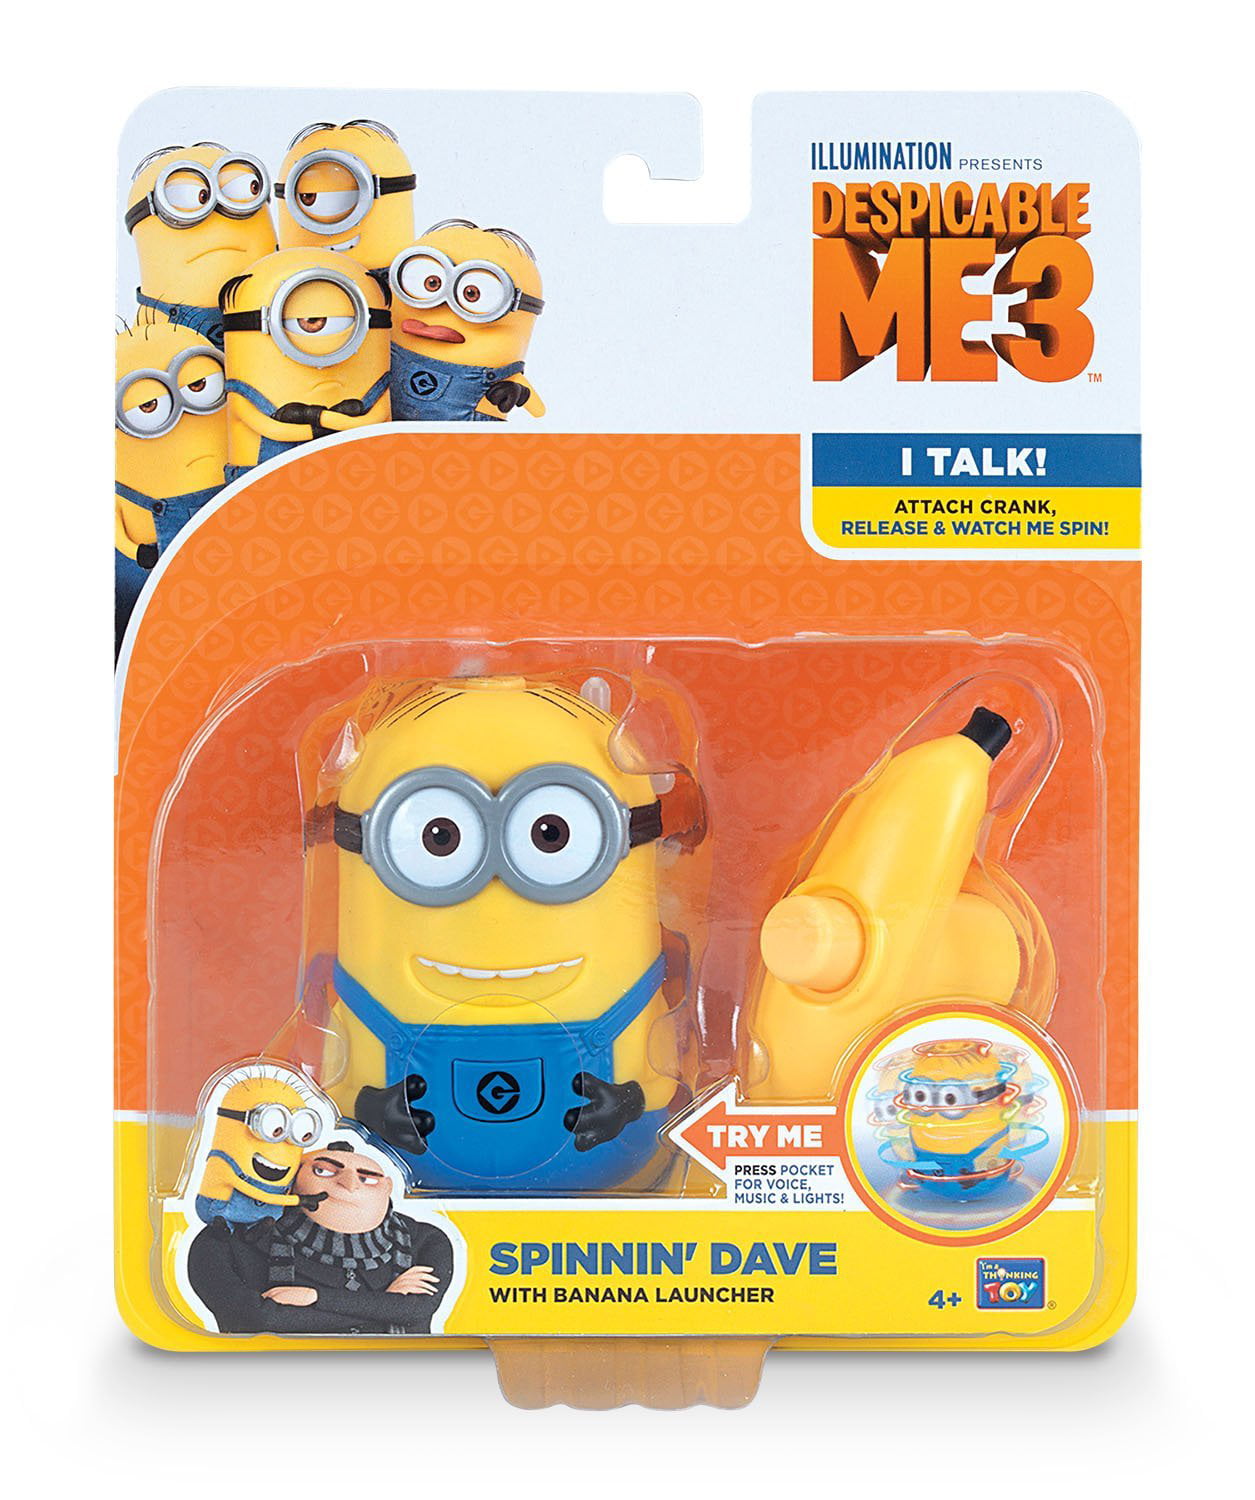 Despicable Me Minion Audio Character For Toniebox Audiobook With Songs 